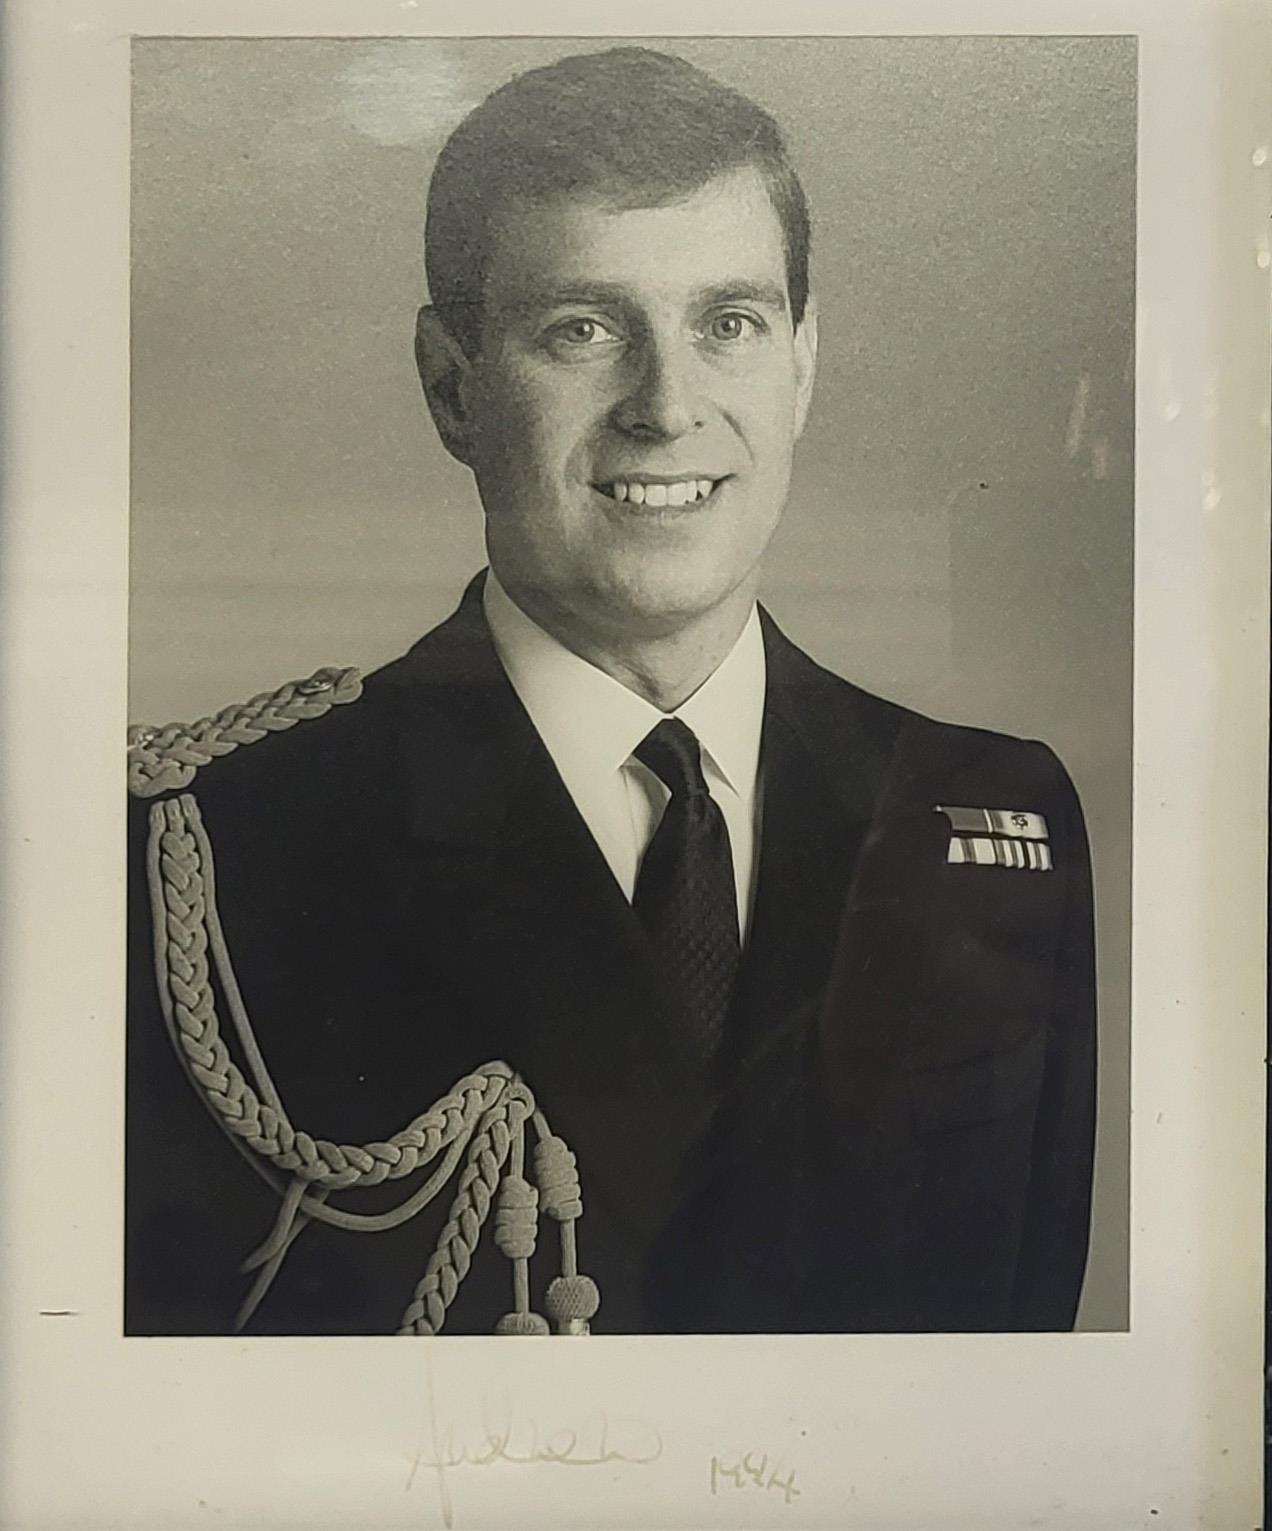 PRINCE ANDREW, DUKE OF YORK, BLACK AND WHITE PHOTOGRAPH OF A BRITISH NAVAL OFFICER Signed in